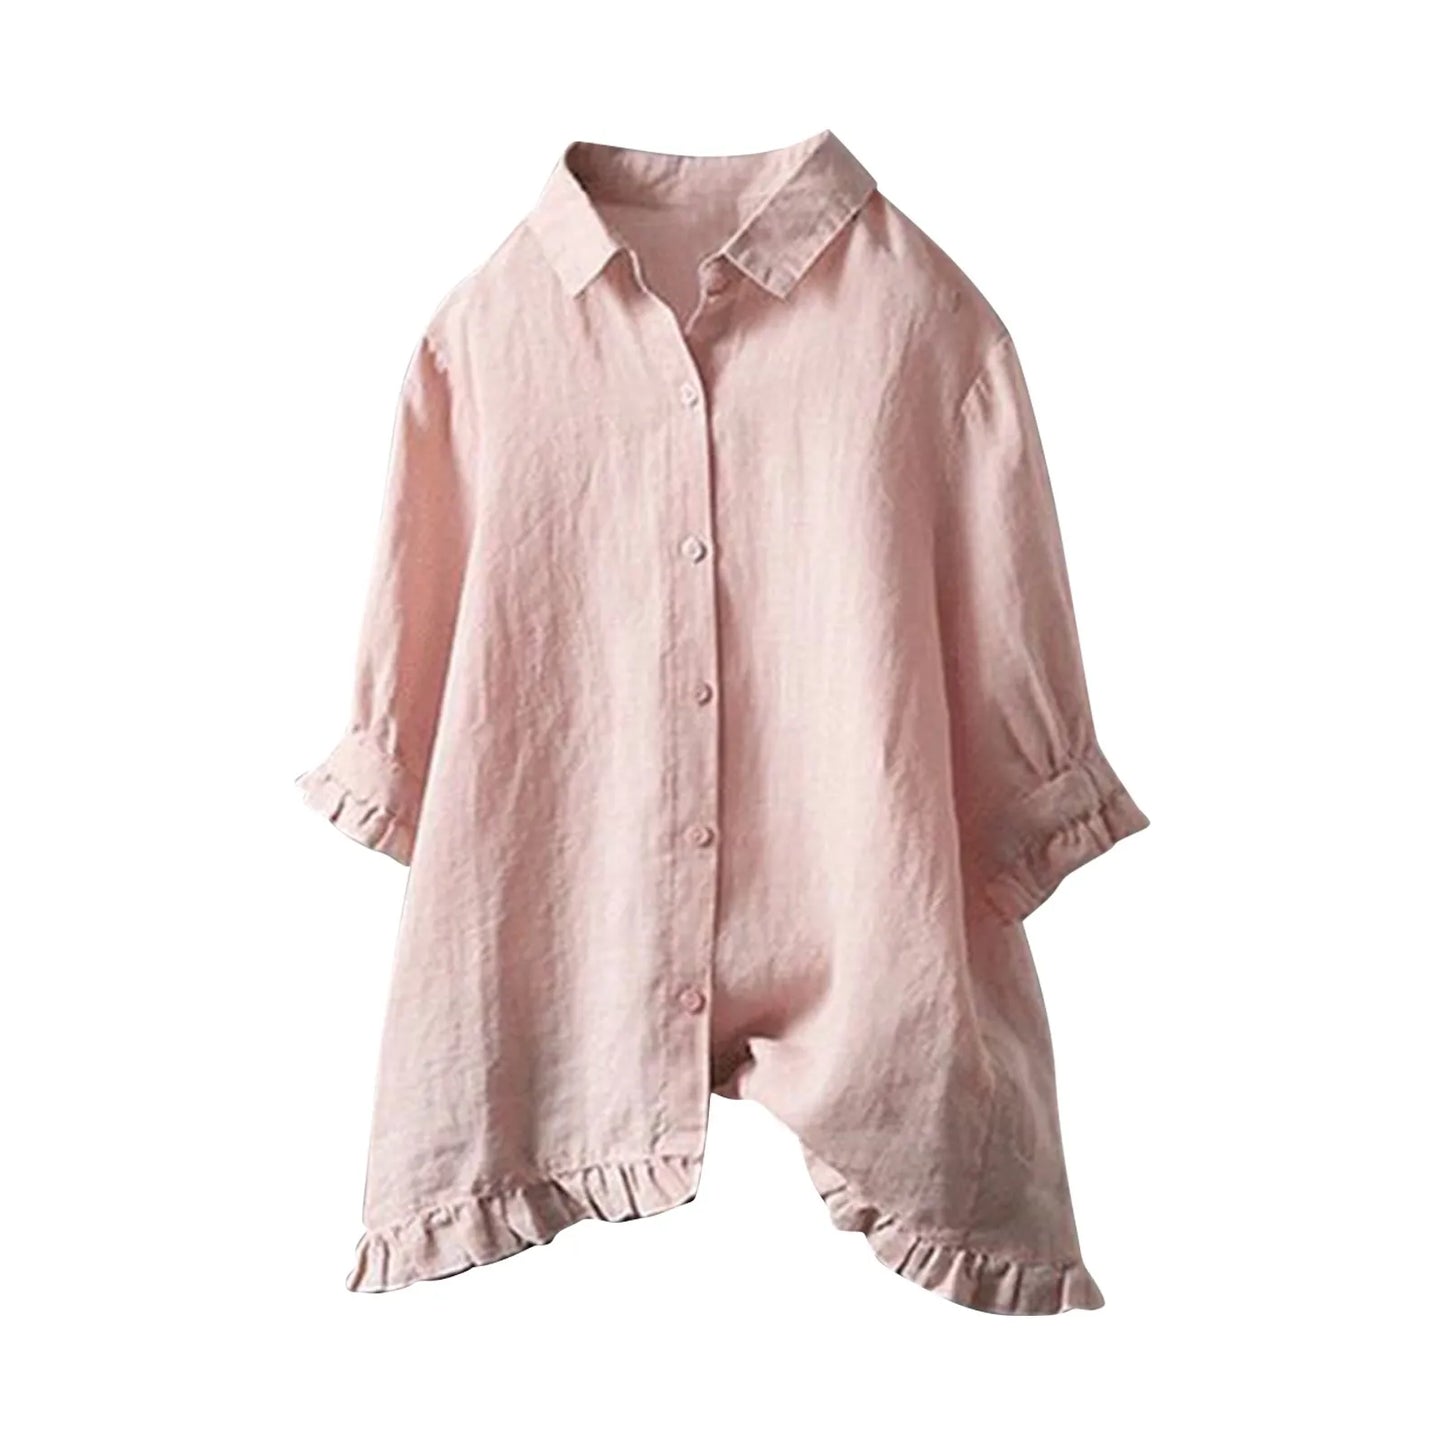 EVELYN - CASUAL BLOUSE | 50% DISCOUNT!